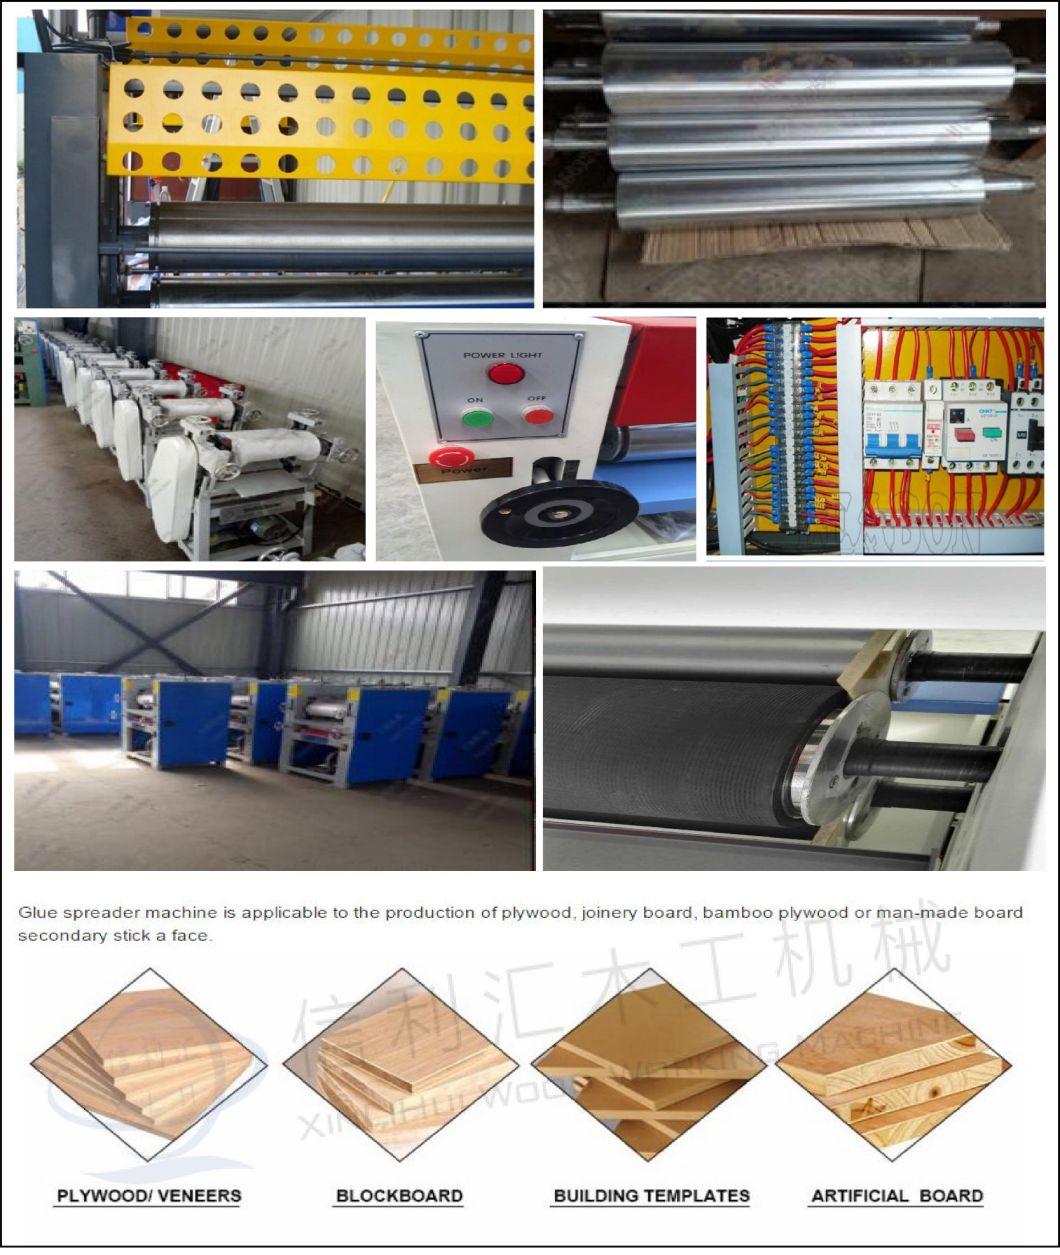 Glue Machine Woodworking Machinery or a Double Glue Spreader of 600mm. Glue Spreader Machine for Plywood.